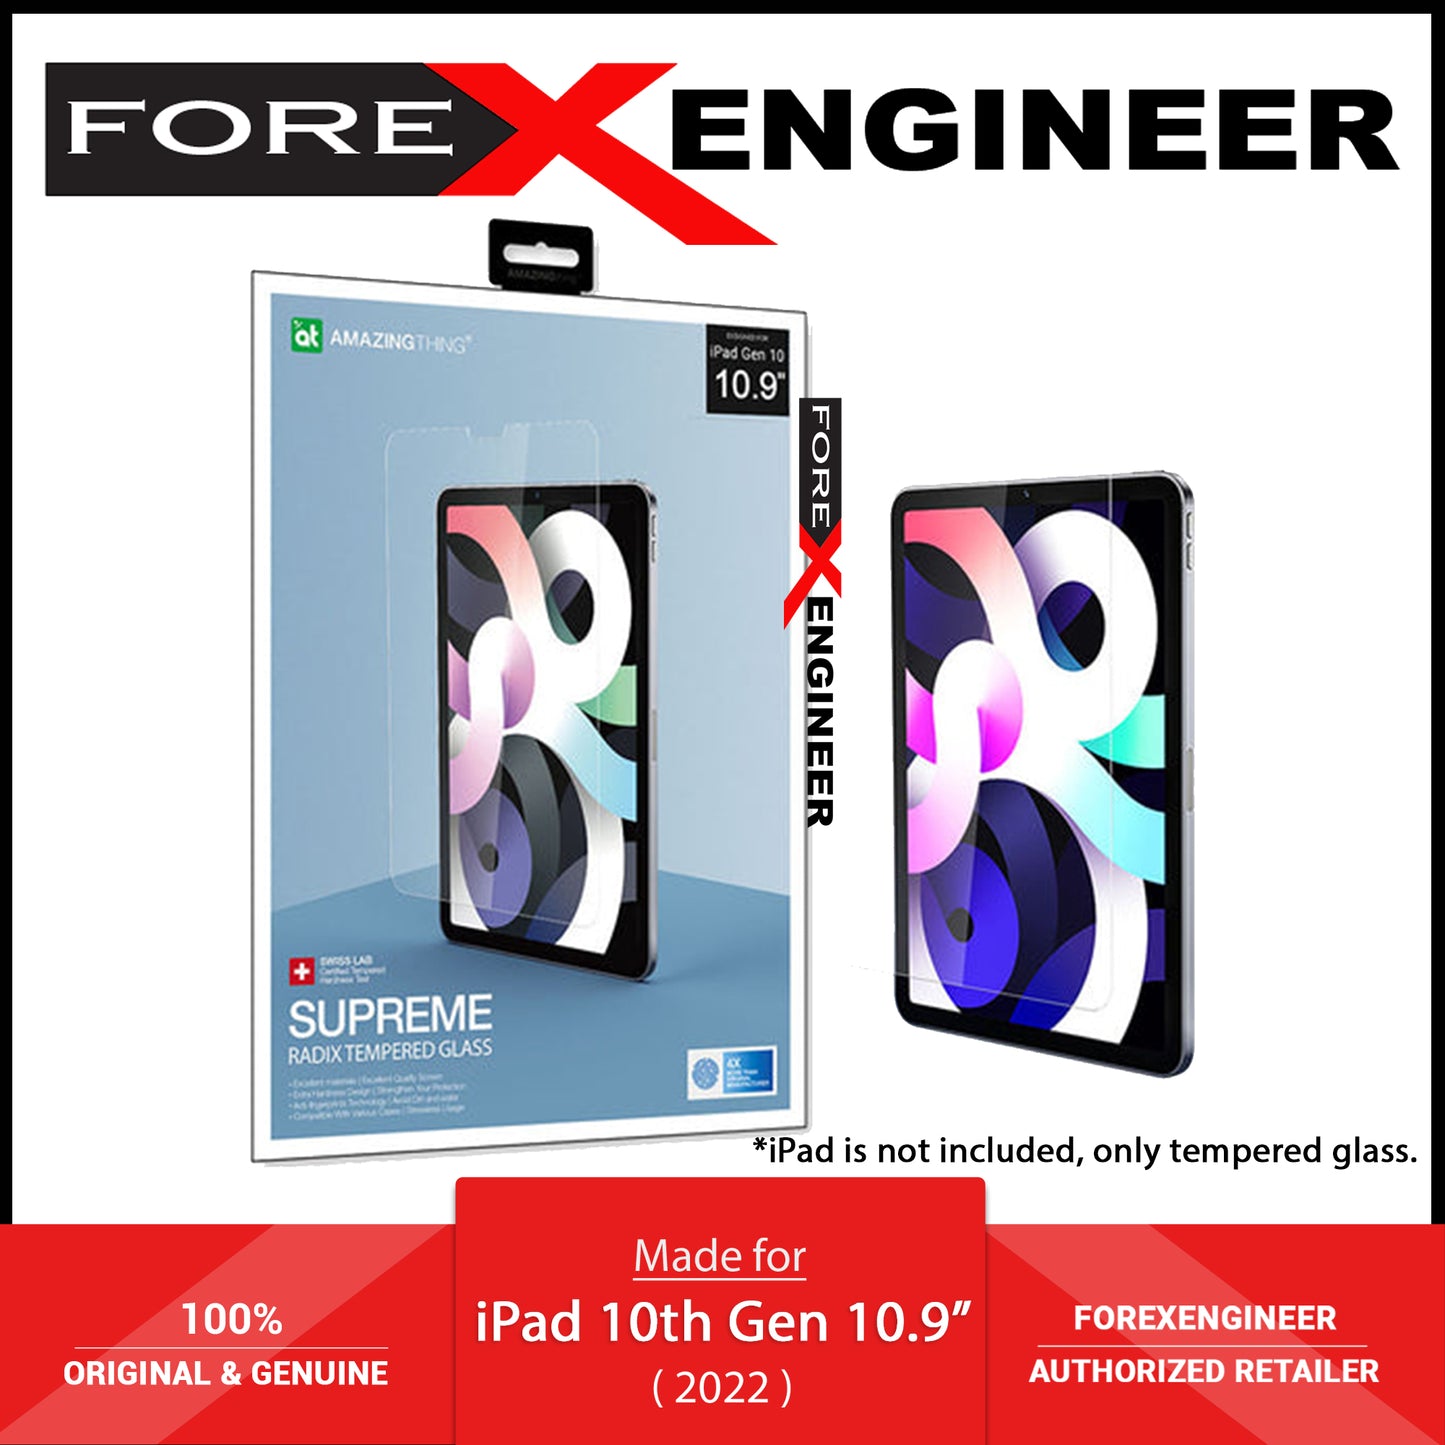 Amazingthing Radix Tempered Glass for iPad 10th Gen ( 2022 ) 10.9" - 10.9 - Ultra Clear 0.3mm (Barcode: 4892878076821 )